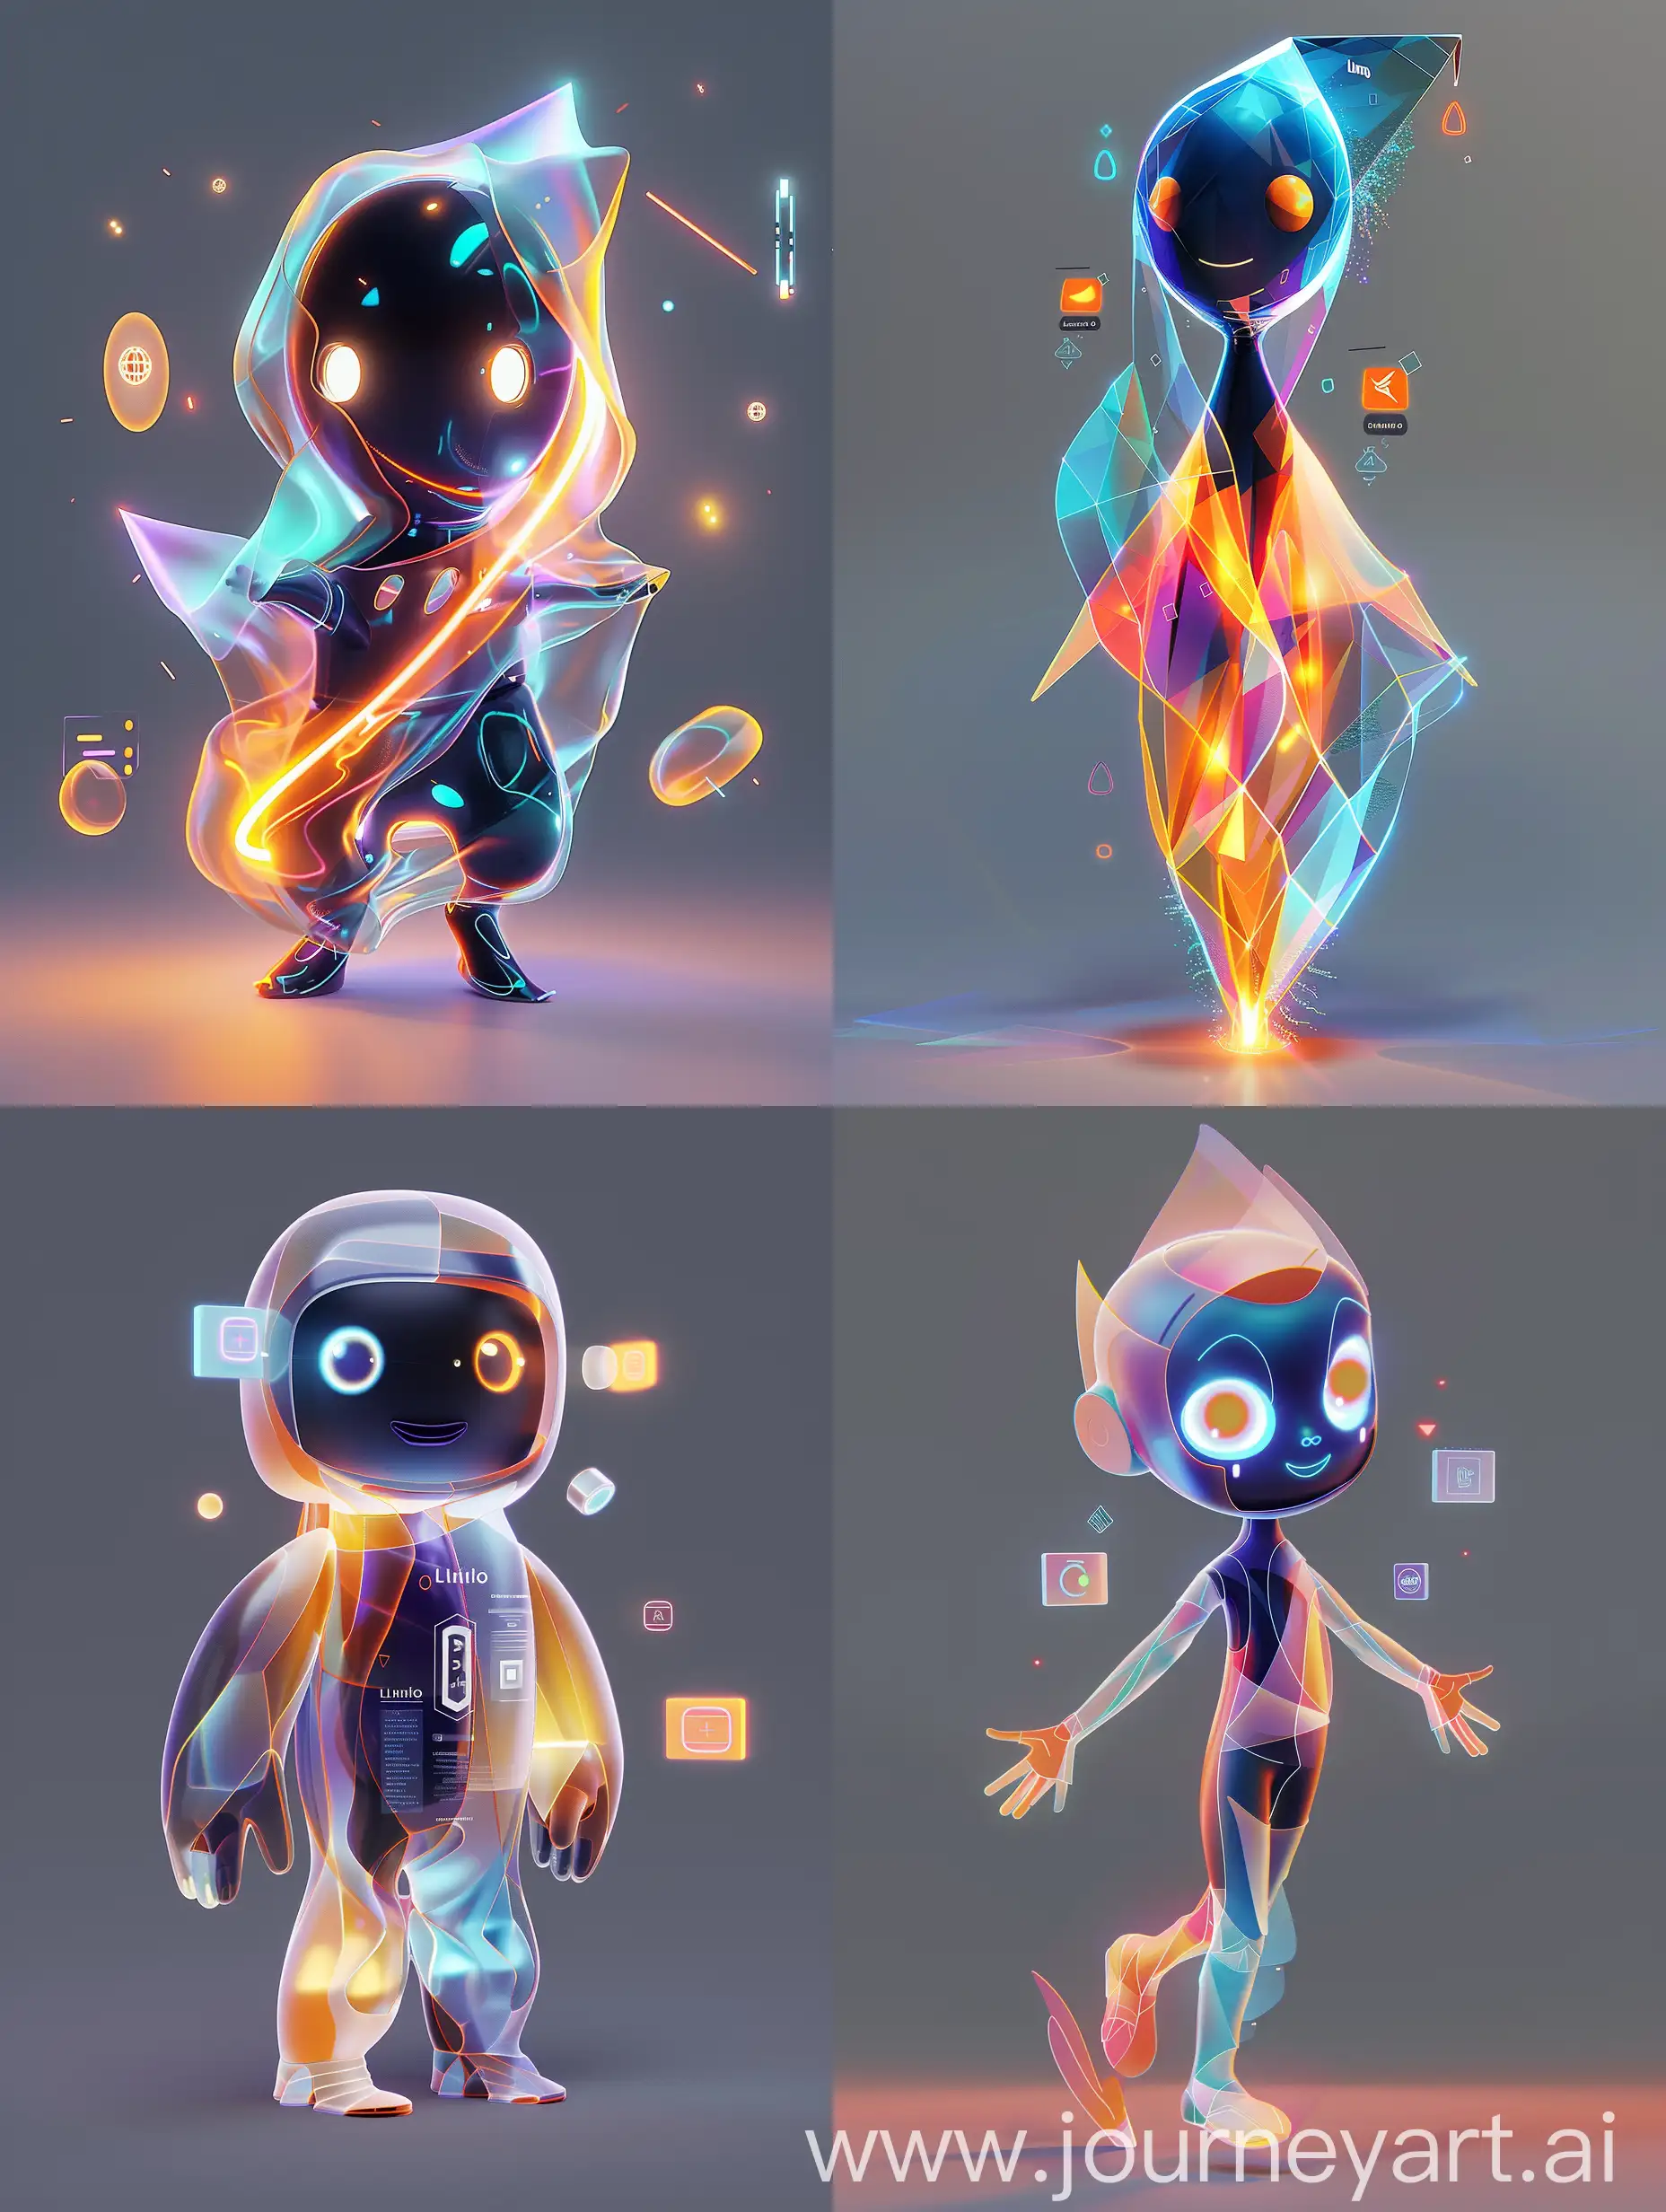 "Design a 3D character named Lumino, the narrator and guide for the 'Spire' template. Lumino should have a sleek, modern design that combines elements of light and geometric shapes. The character should have a semi-transparent, luminescent body with soft, glowing edges and a form that is fluid, incorporating abstract and geometric design elements. Use a color palette of deep blues, purples, and warm oranges with subtle gradients. Lumino should have expressive eyes, a welcoming smile, and a calm demeanor. Include small, holographic interfaces that float around Lumino, symbolizing its role as a guide and narrator. The character's movements should be smooth and fluid, reflecting its light and ethereal nature."pixar and disney 3D character style